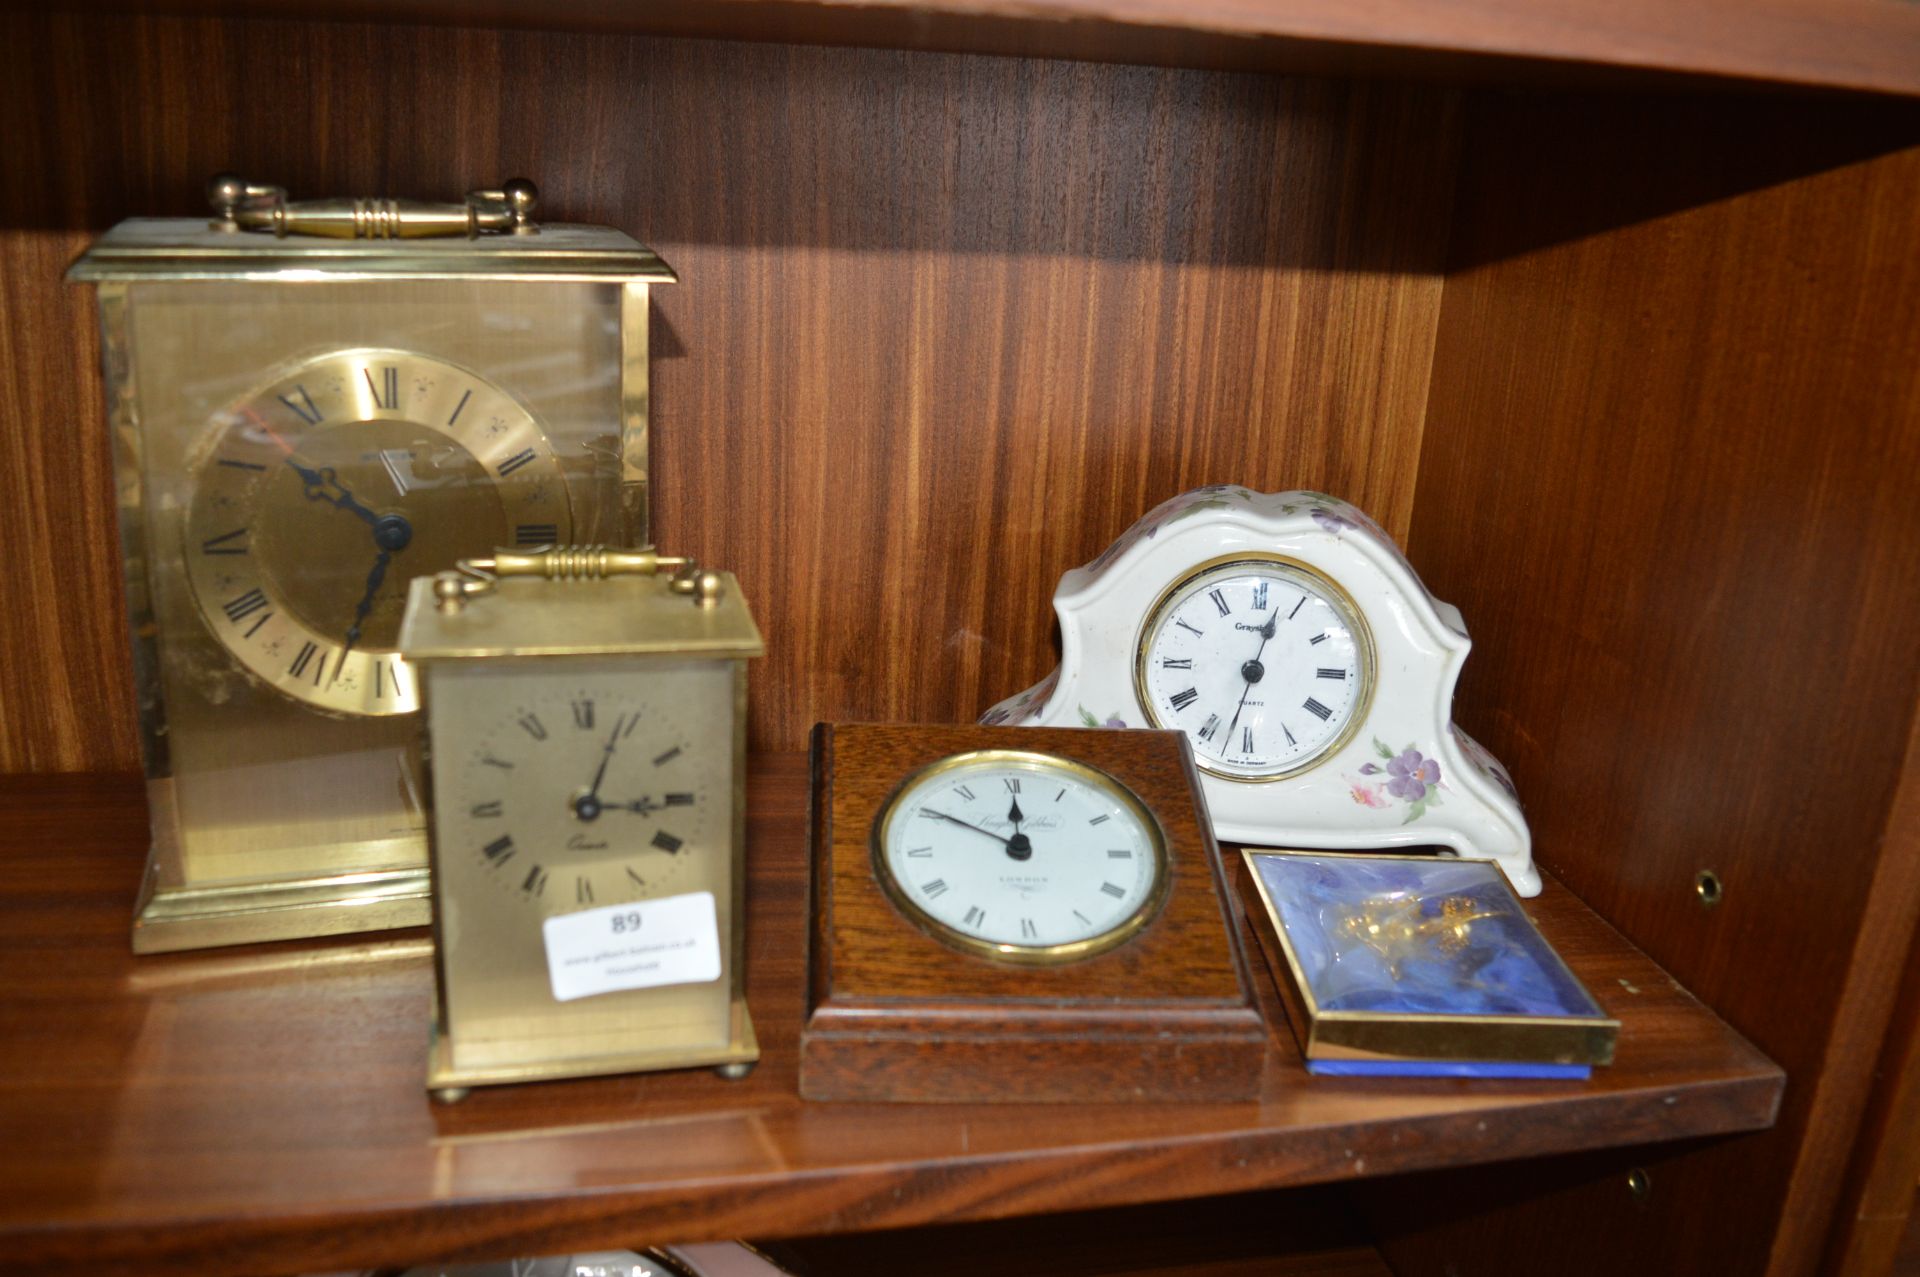 Two Carriage Clocks